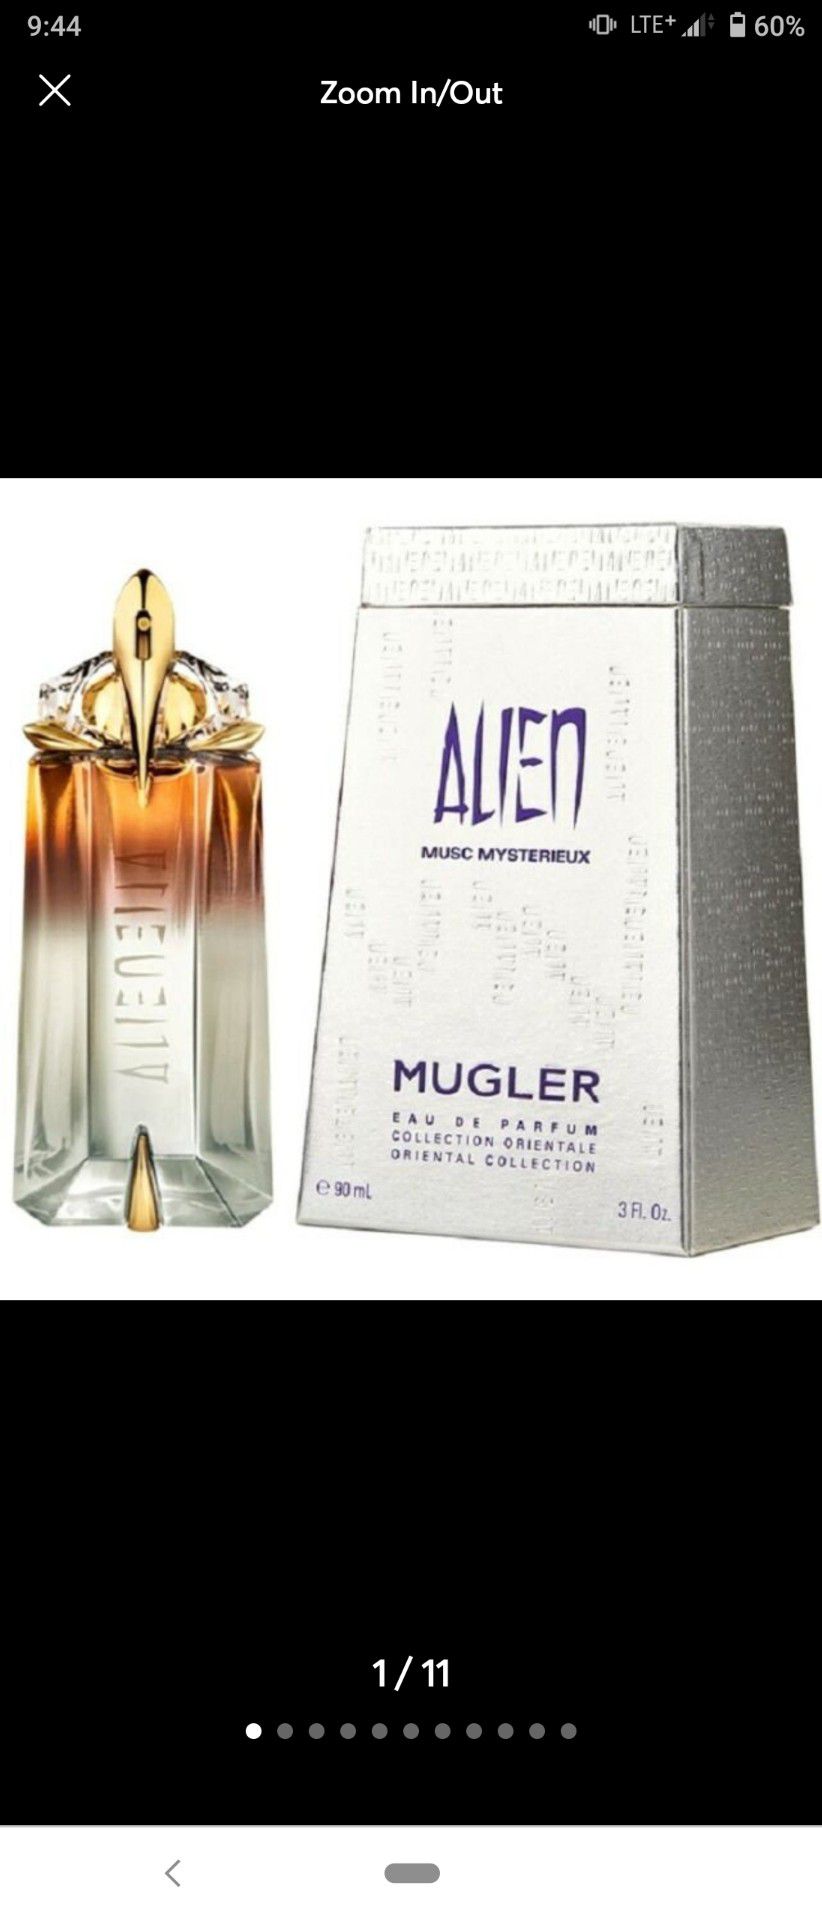 Thierry Mugler Alien Musc Mysterieux 90ml EMPTY BOTTLE,BOX AND COVER, NO PERFUME